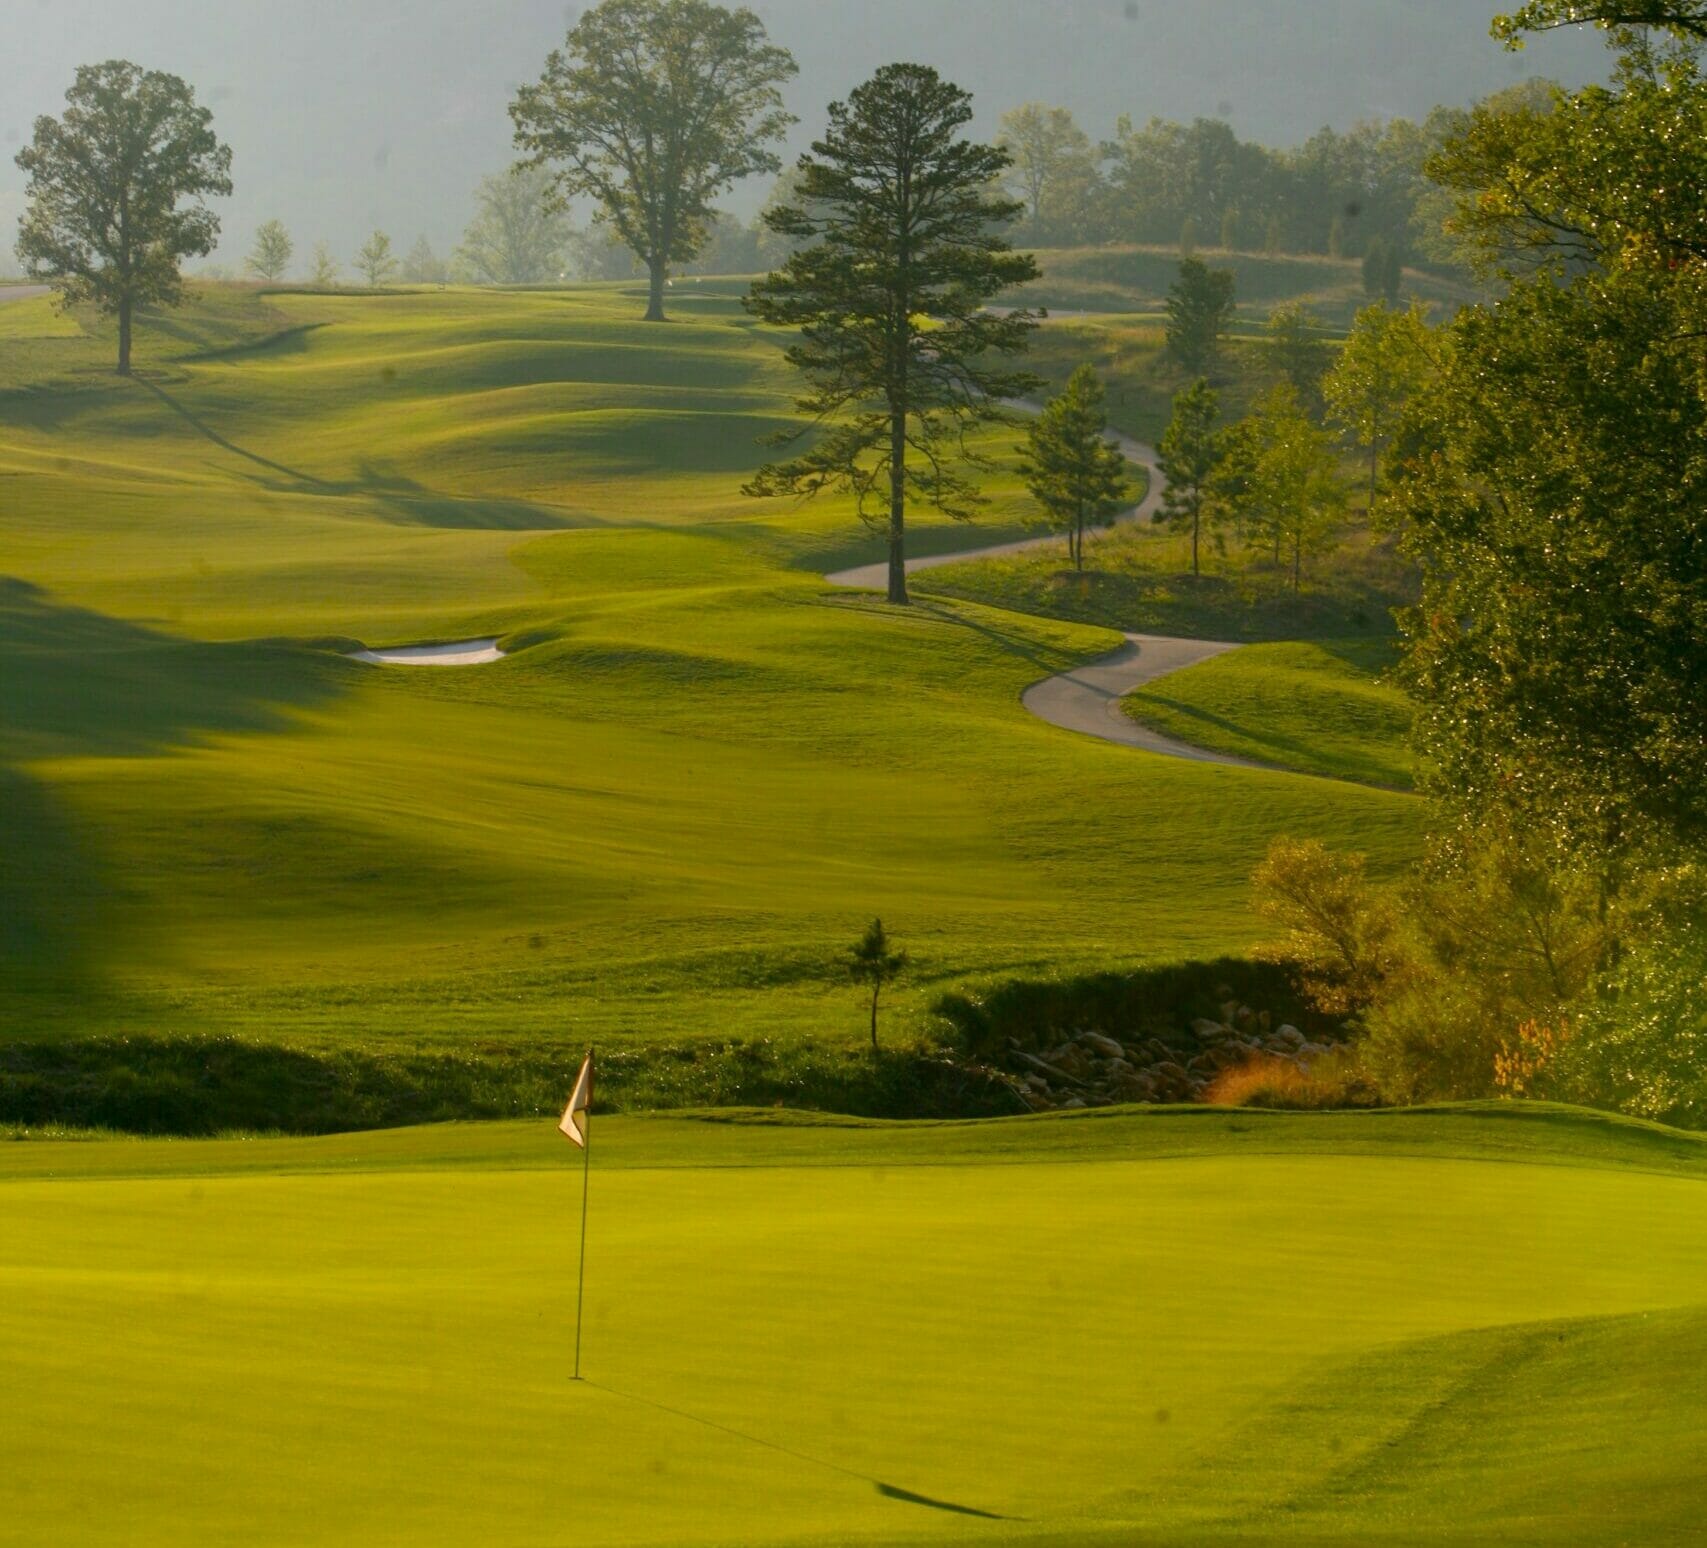 Bright's Creek Golf Club in Mill Spring, North Carolina with views of the Blue Ridge Mountains